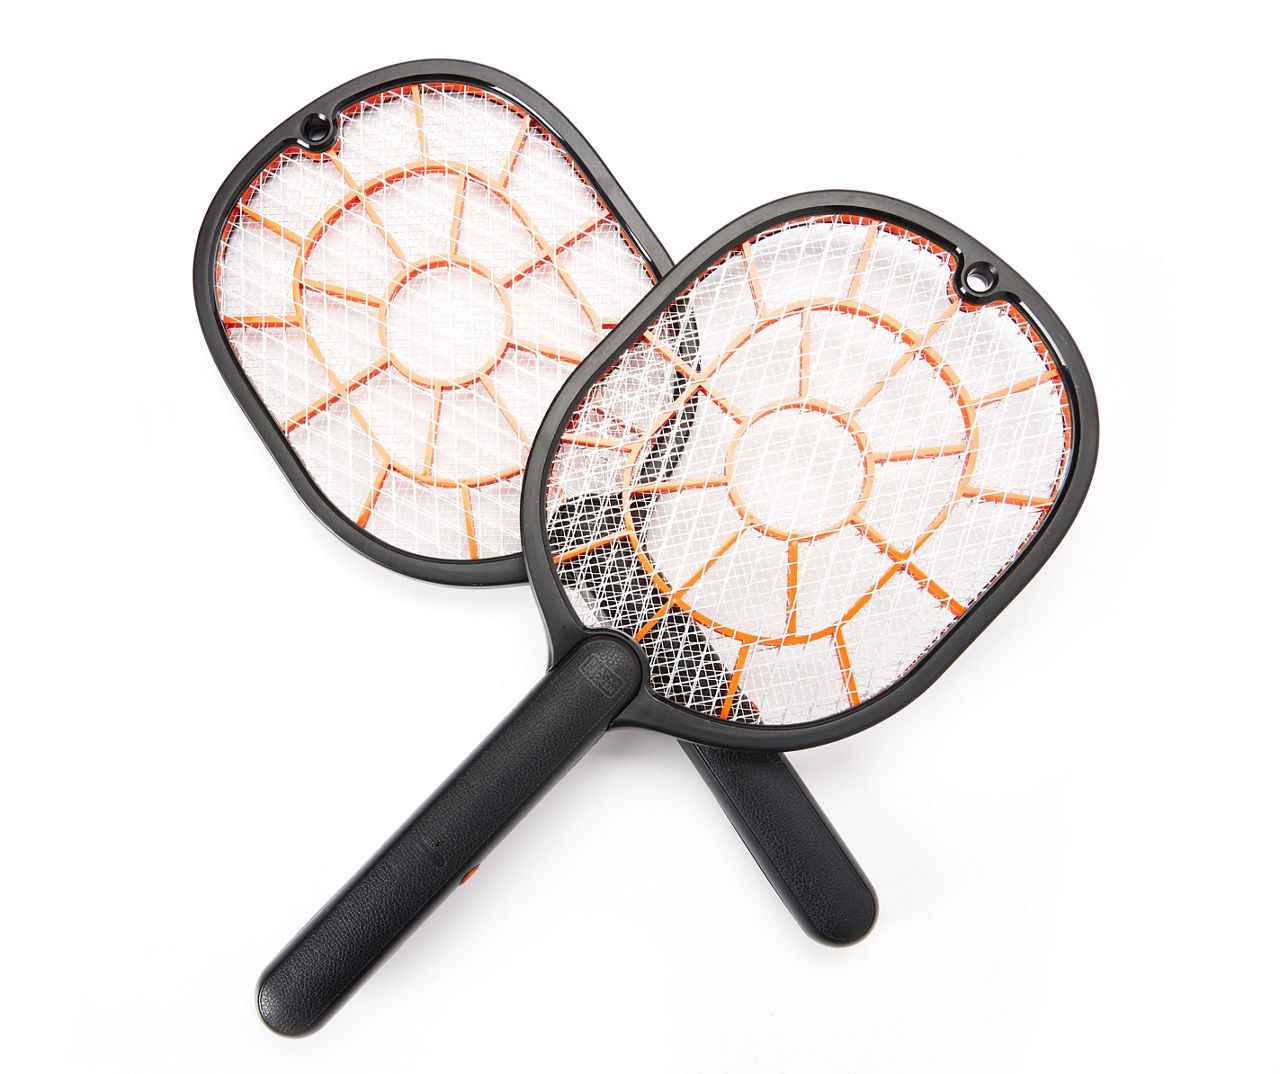 Black + Decker Electric Fly Swatter Bug Zappers, 2-Pack